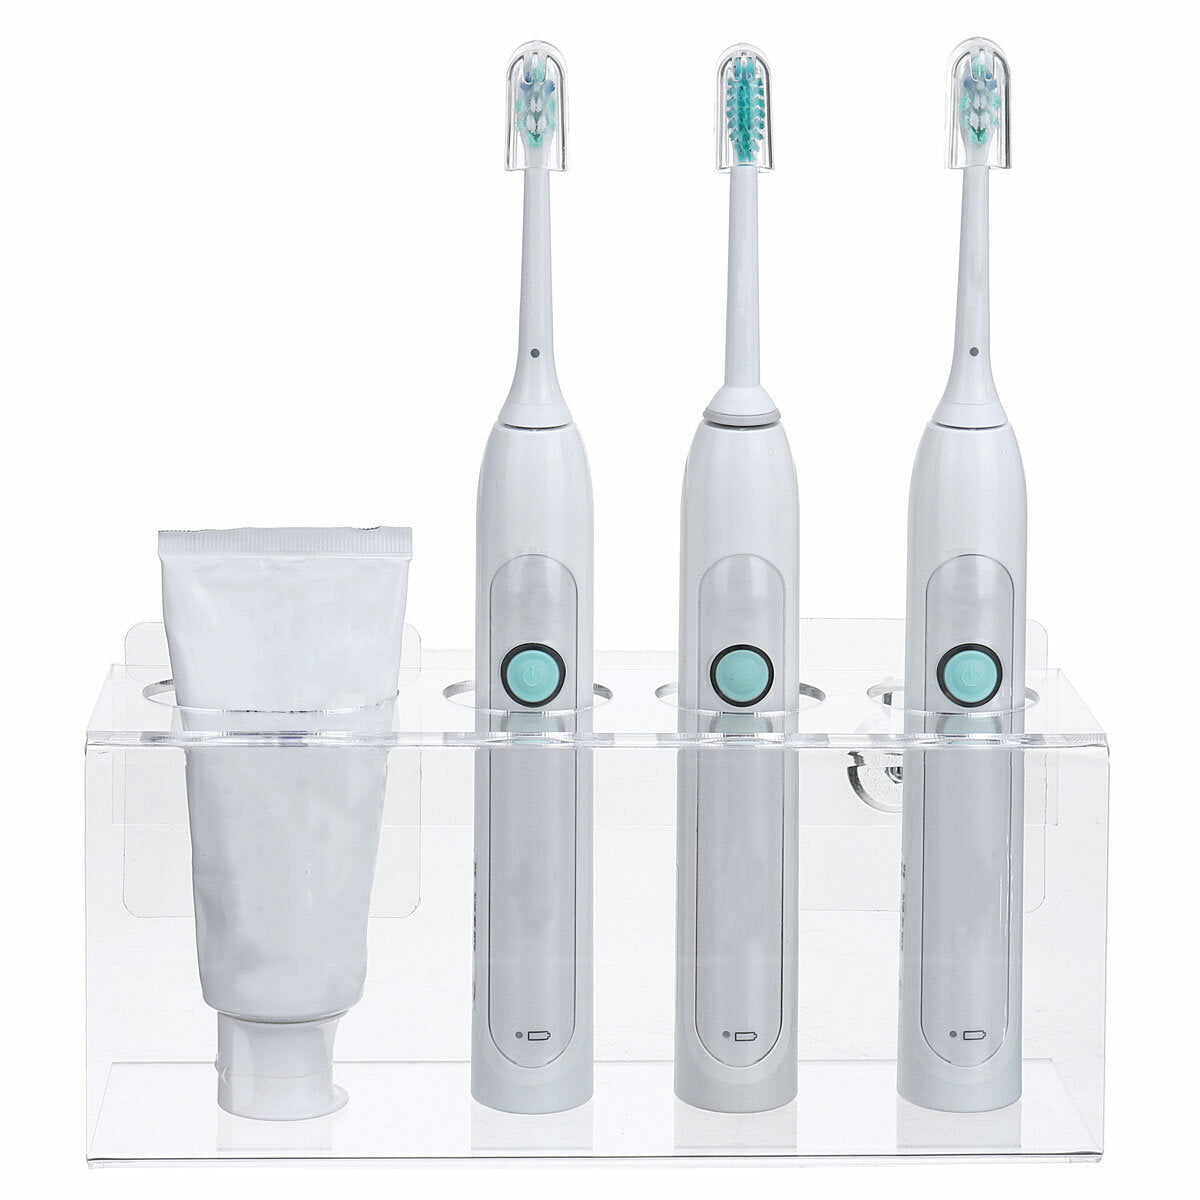 1pc Wall Mounted Electric Toothbrush Holder Toothpaste Holder Bathroom Organizer Detachable Bathroom Storage Caddy